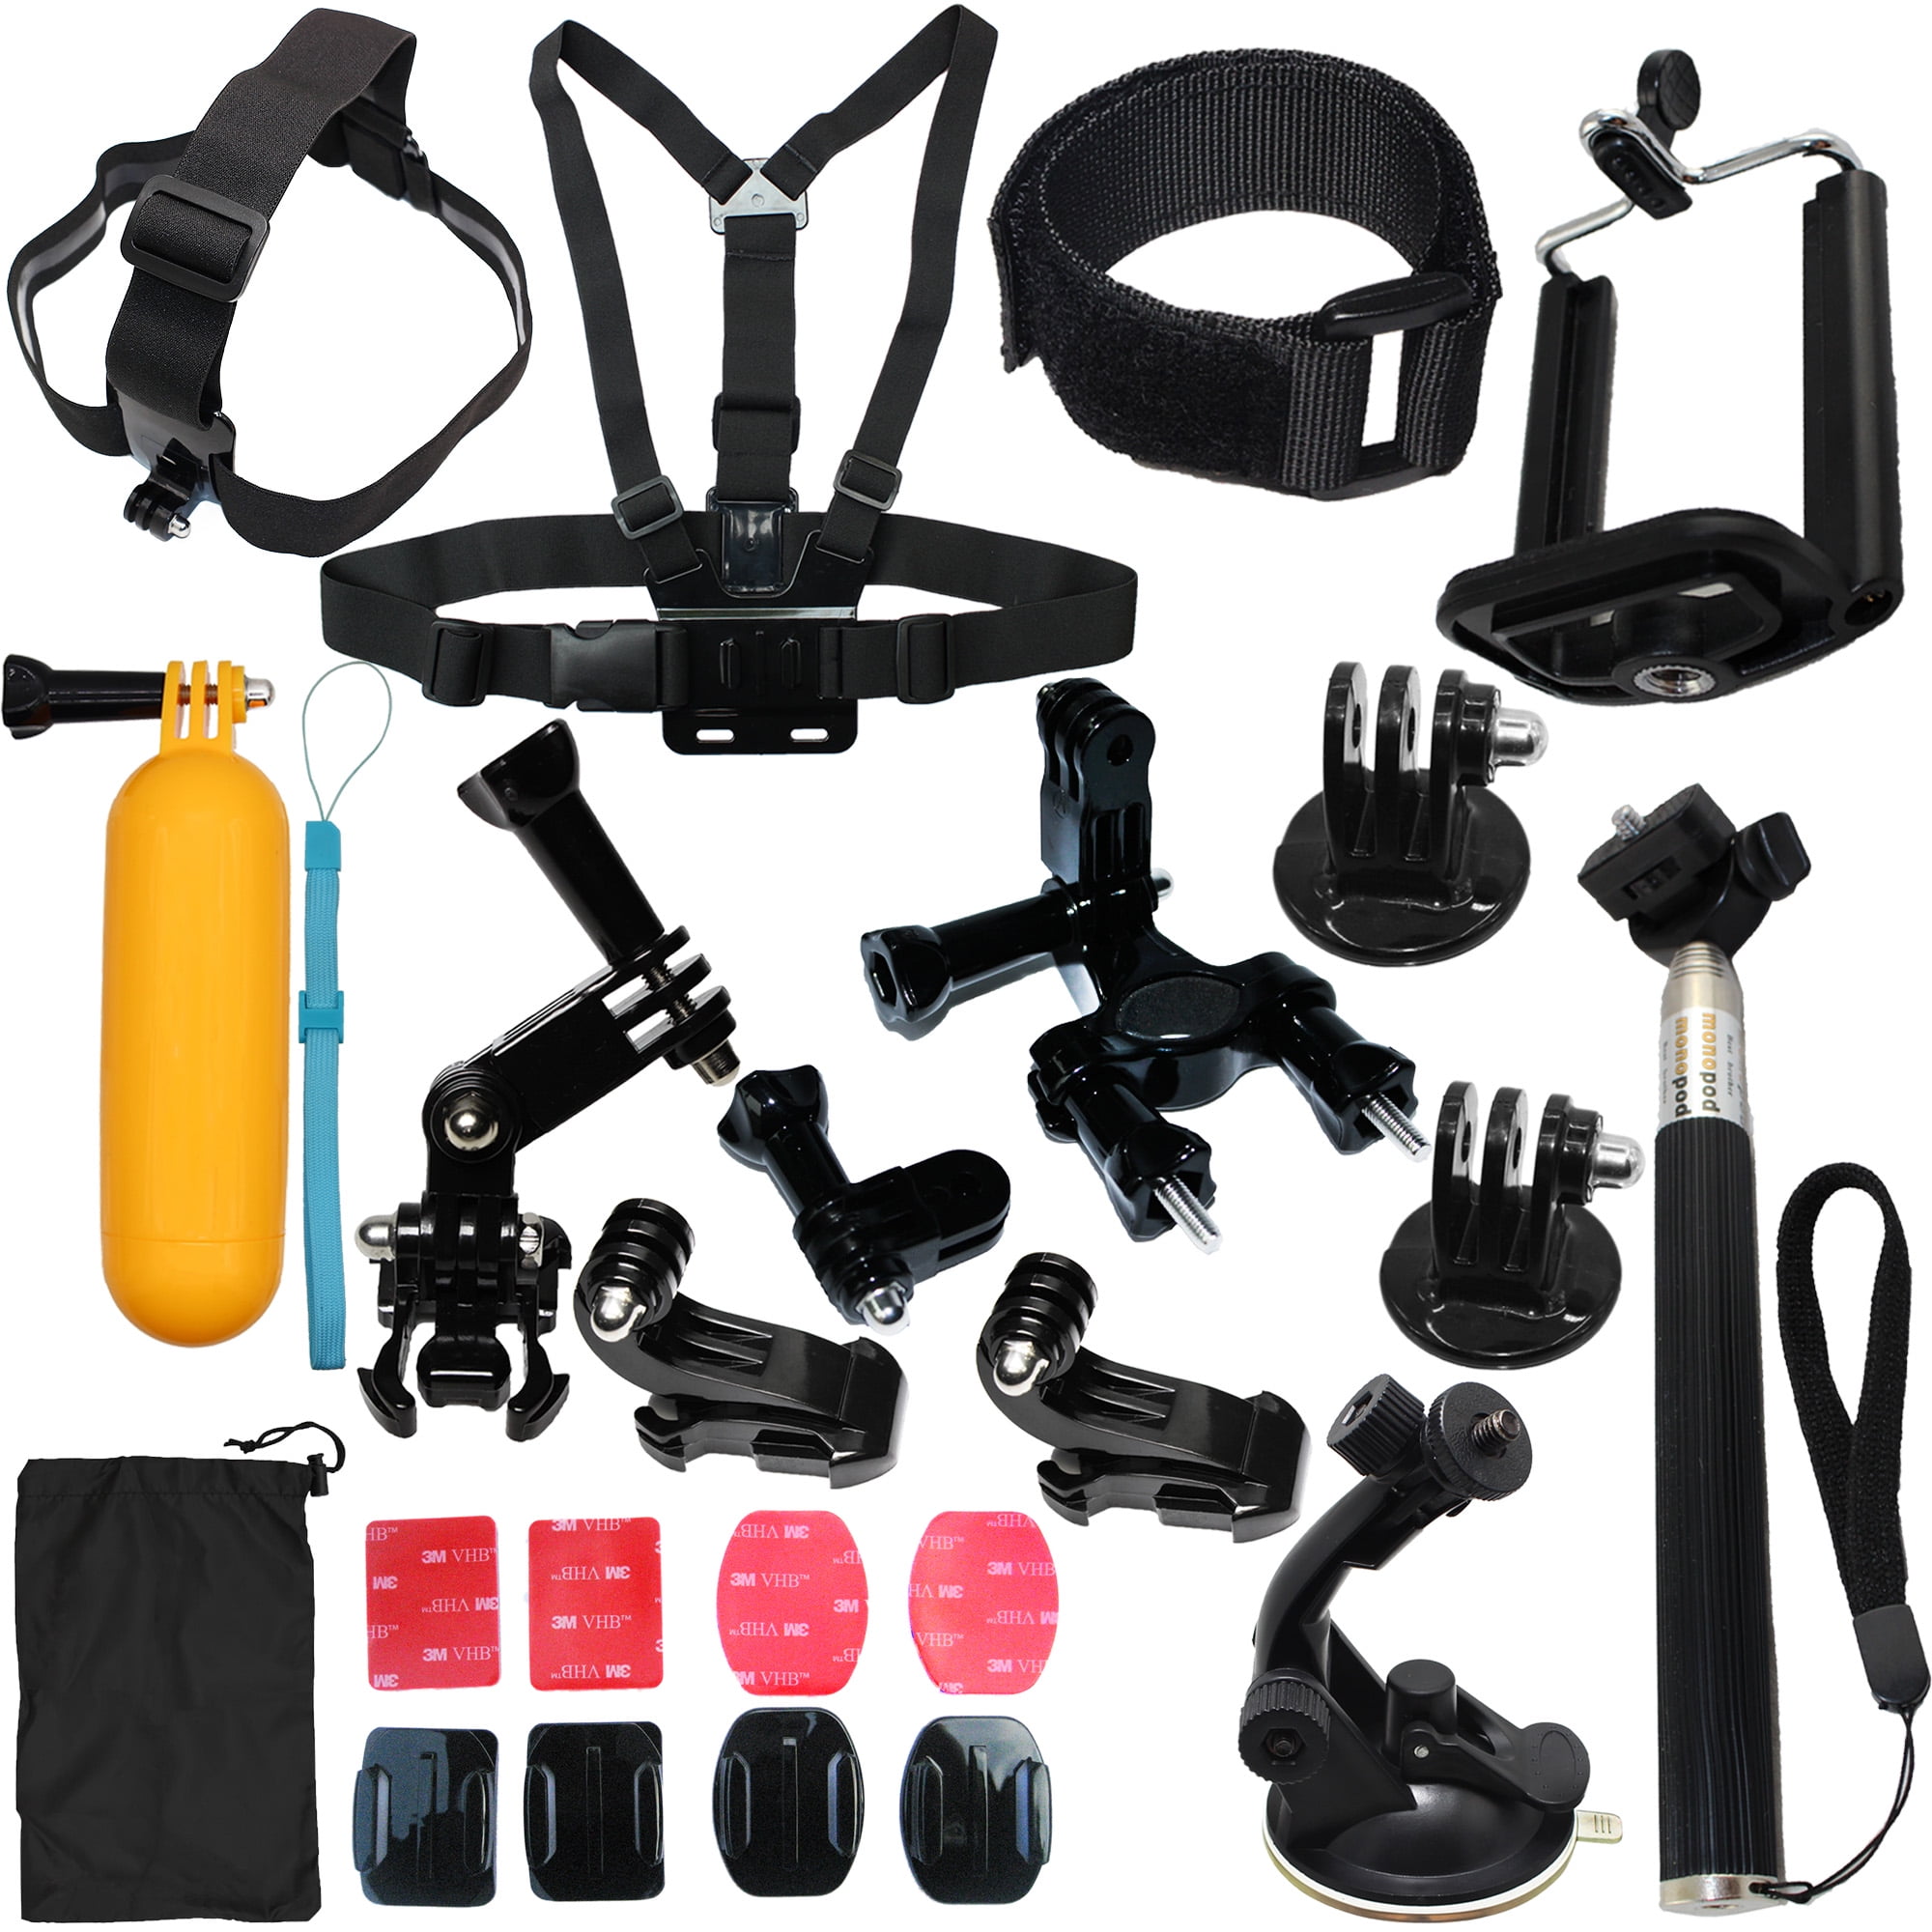 4 Neewer 3 In 1 Strap Accessory Kit for GoPro Hero 1 2 3 3 